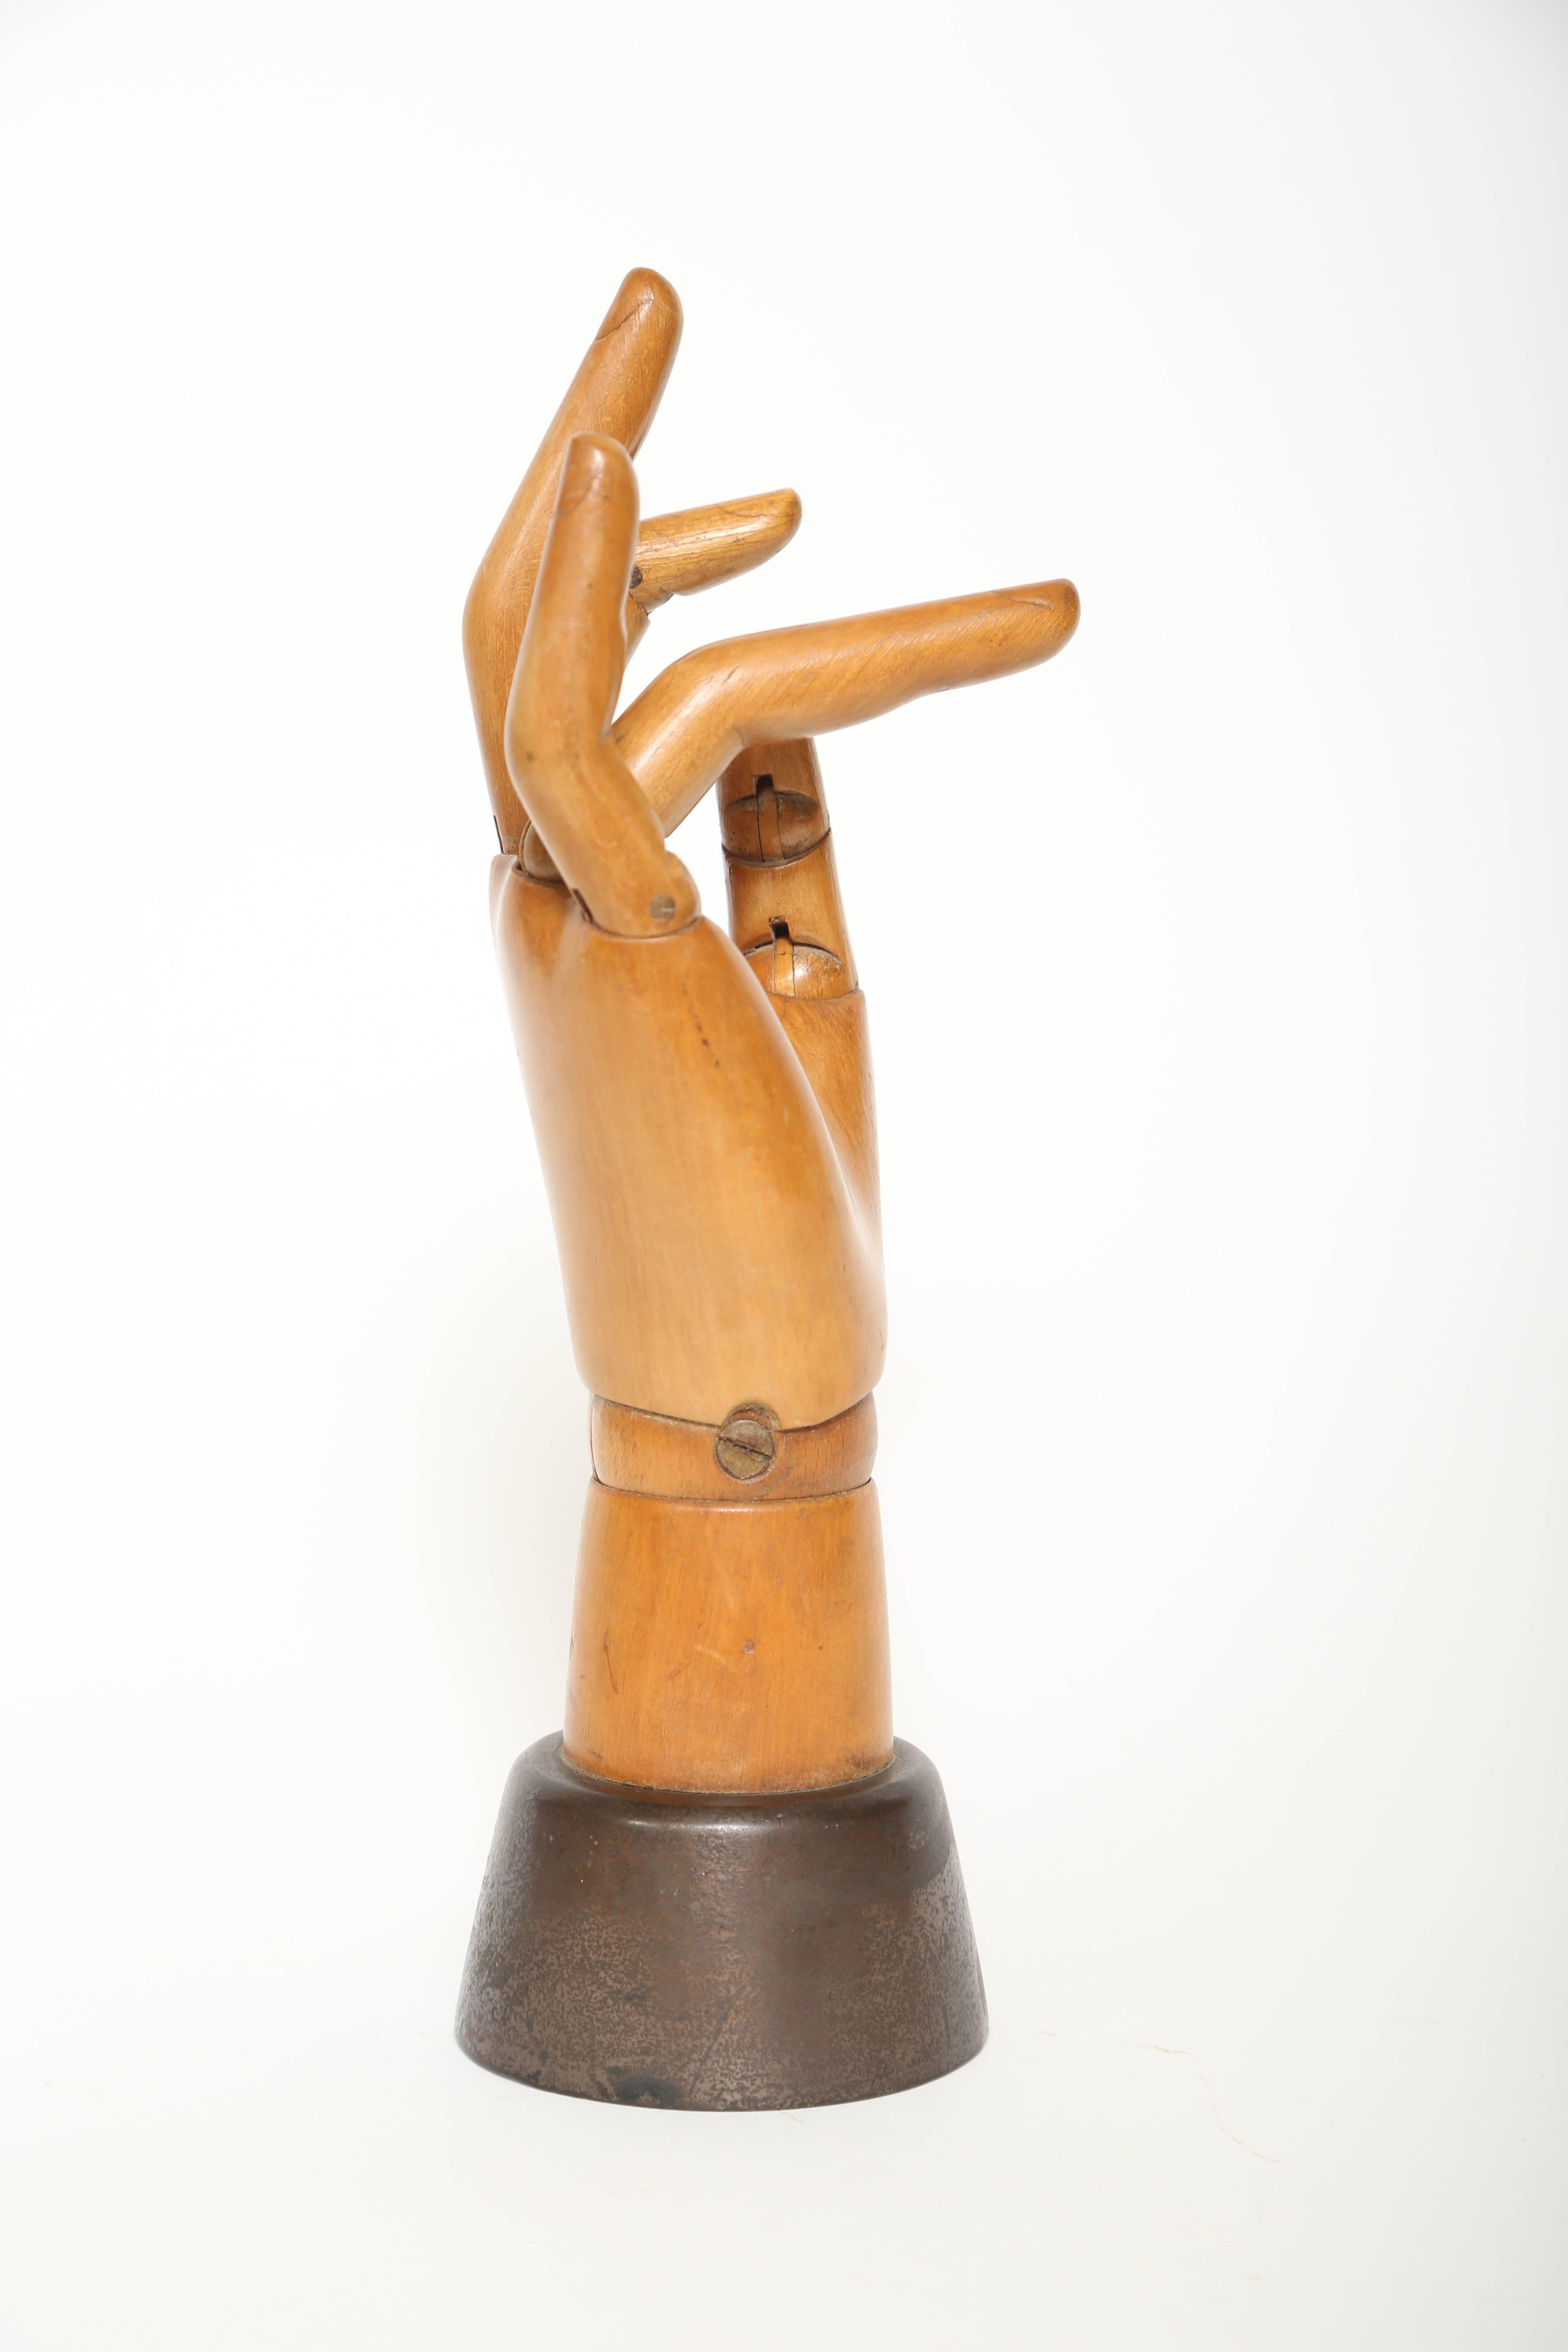 Life size articulated wooden hand mannequin with a weighted iron base. Used by artists and sometimes by shops to display gloves, jewelry and so on.  This piece is great quality with nicely carved fingers and finger nails displaying good honey color